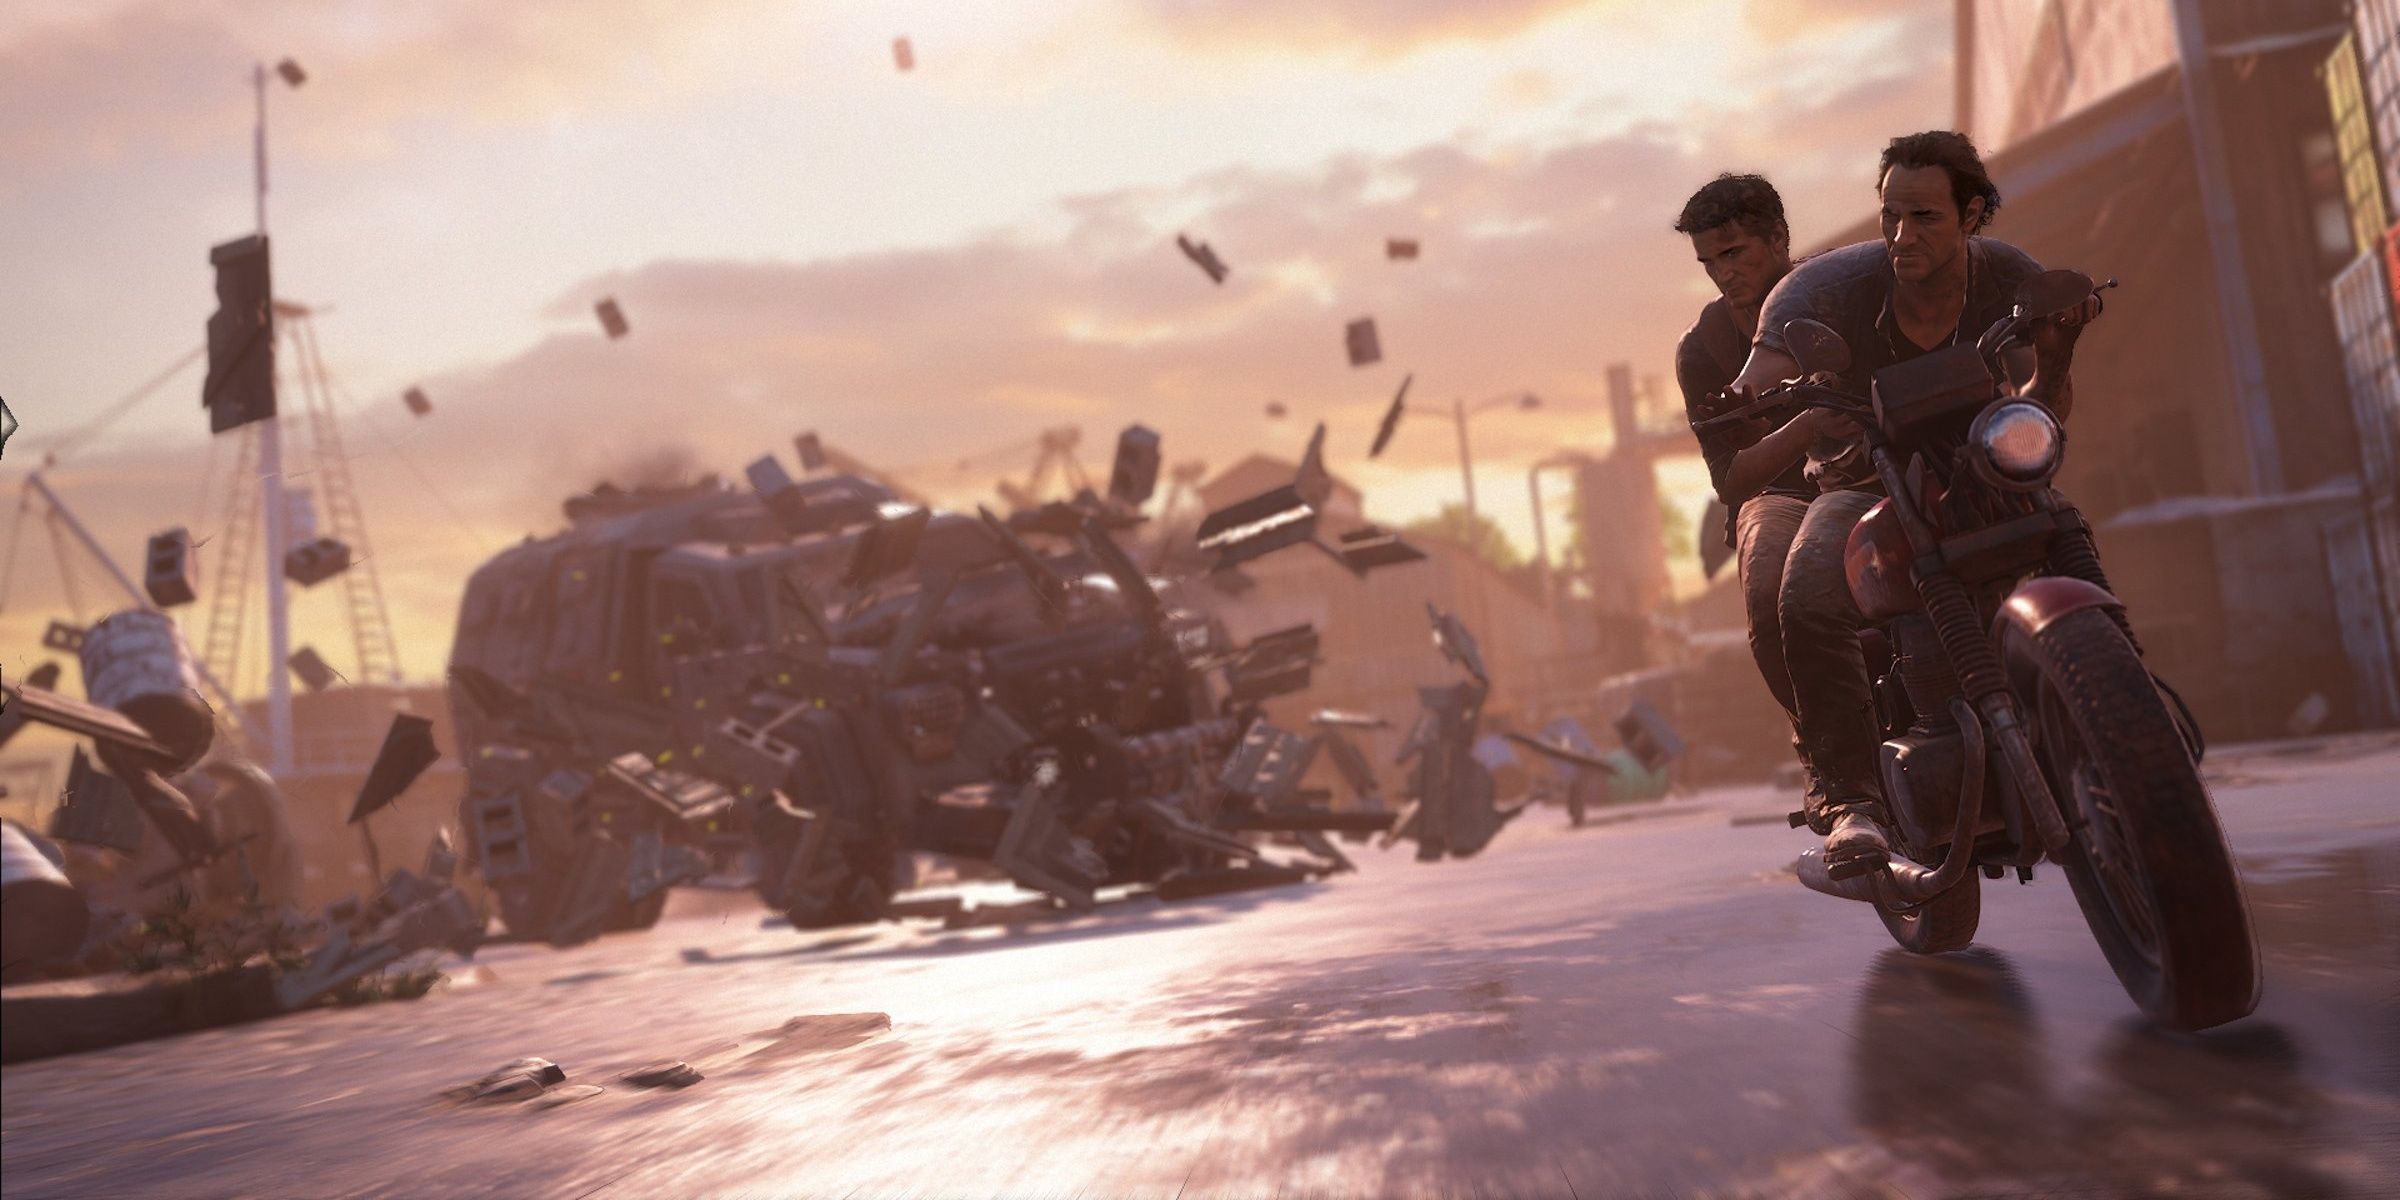 A screenshot showing Sully and Nate being chased by a tank in Uncharted 4: A Thief's End